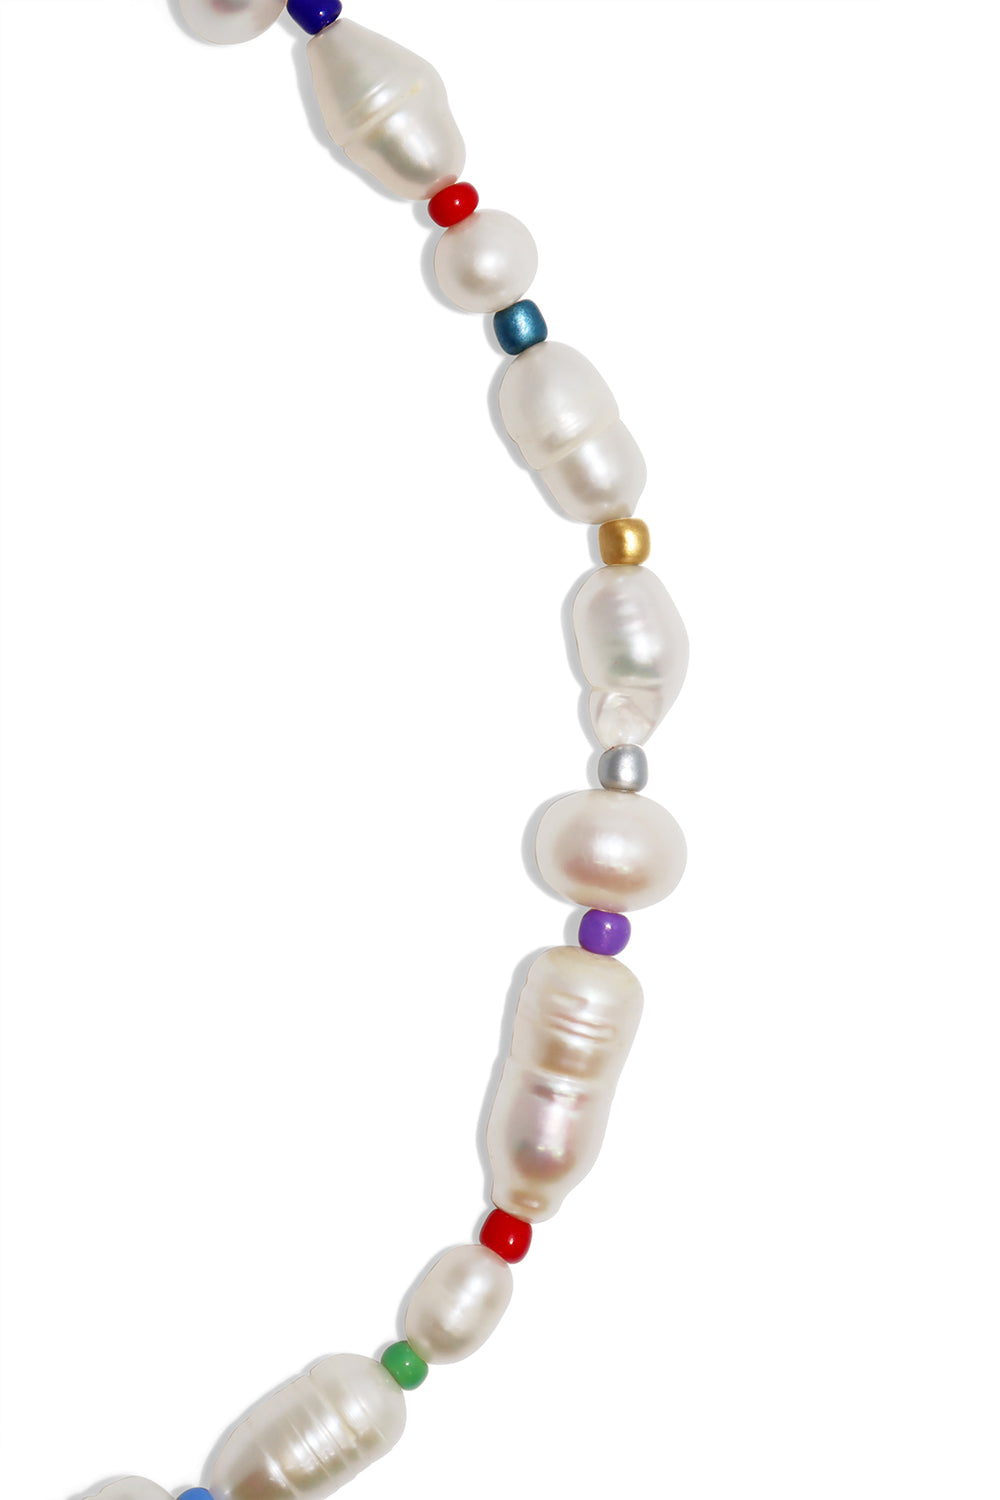 IK River Pearl & Colourful Beads Necklace close view